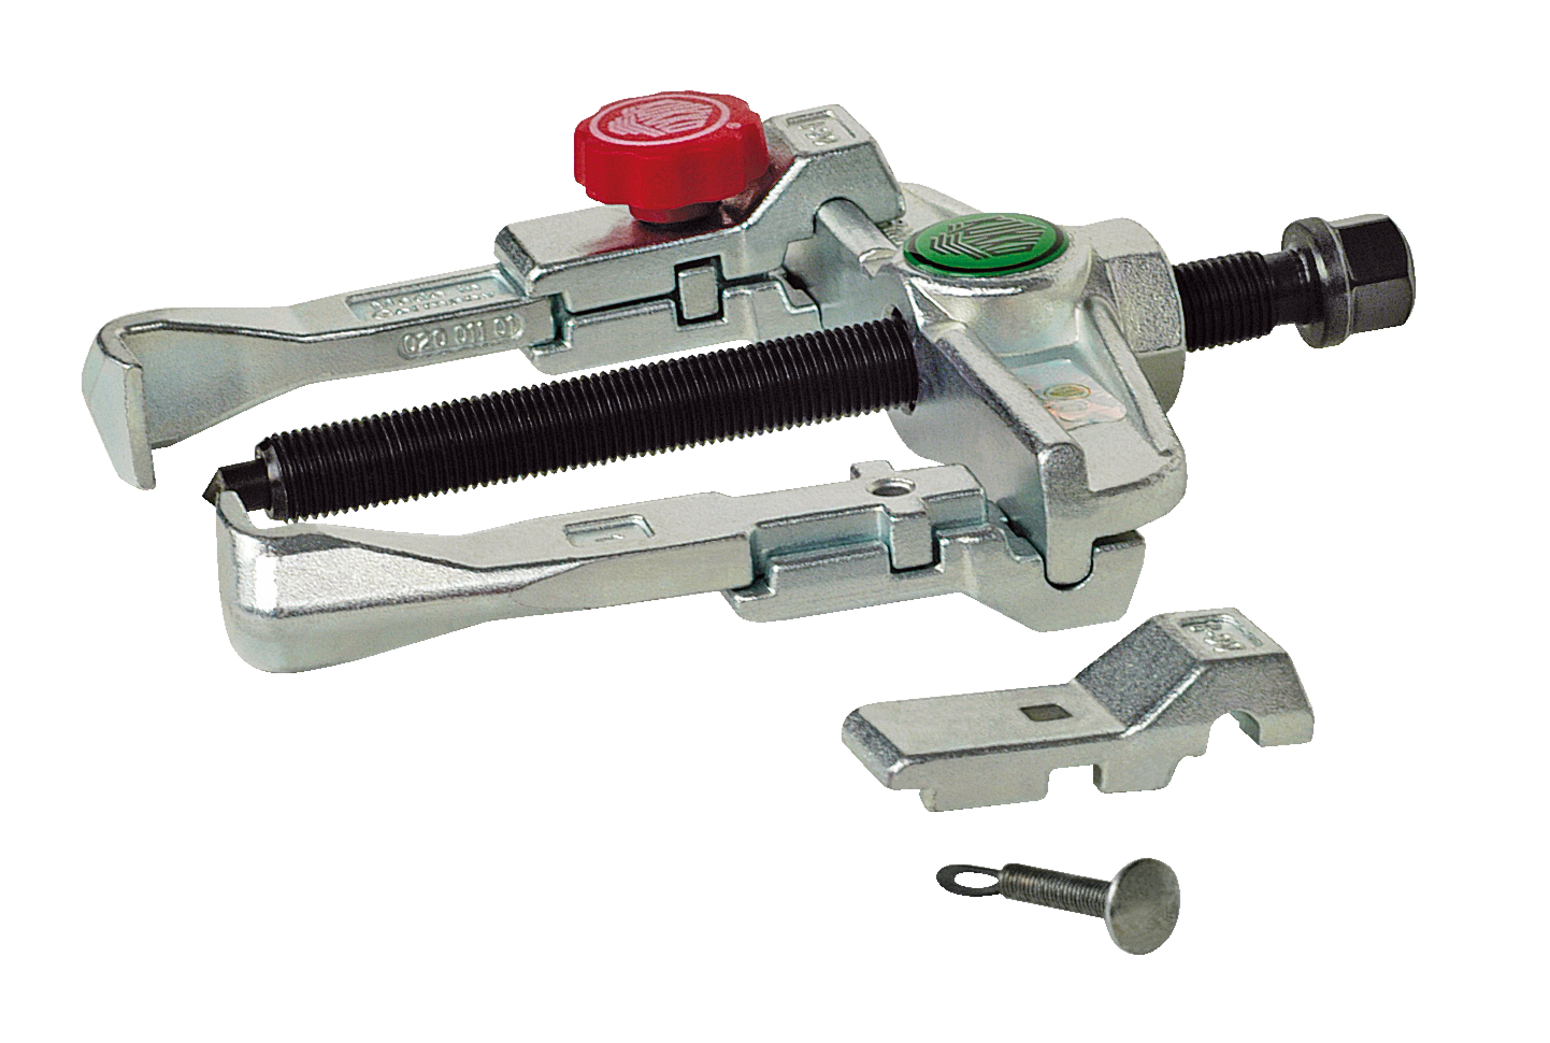 A converted 2-arm universal puller of the 20+ series with quick-adjustable trigger hooks